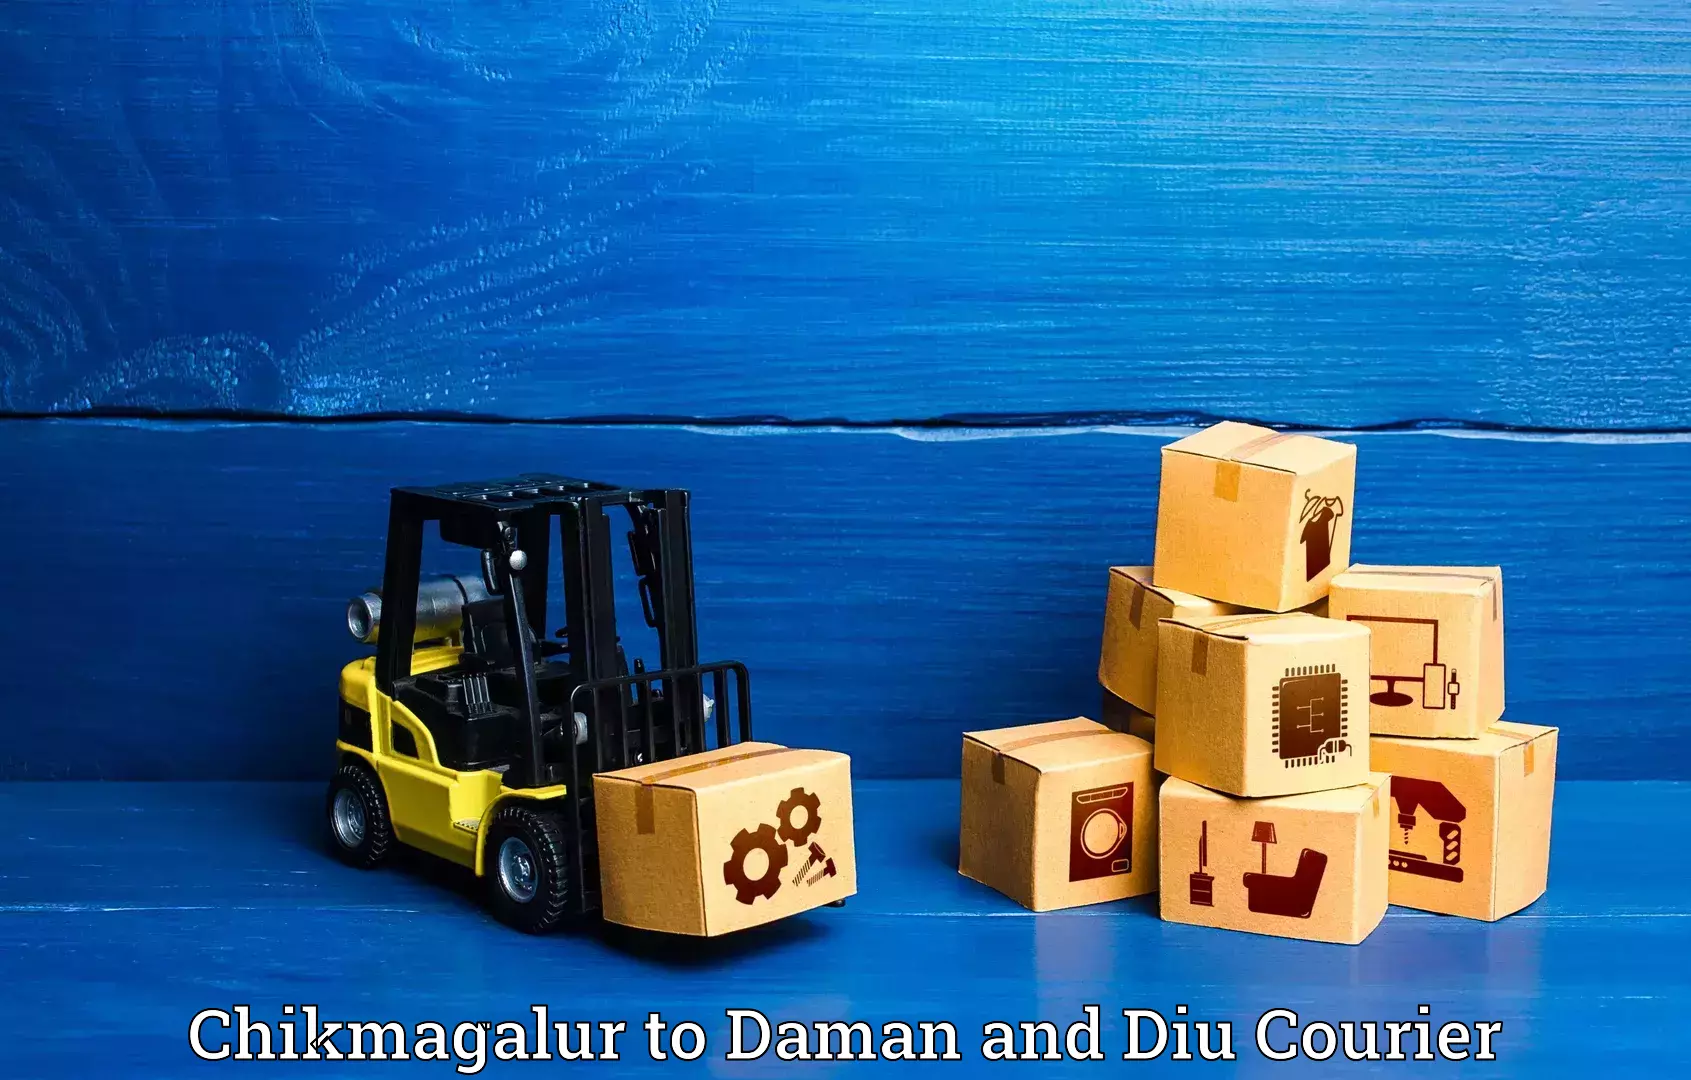 Luggage transport consultancy Chikmagalur to Daman and Diu